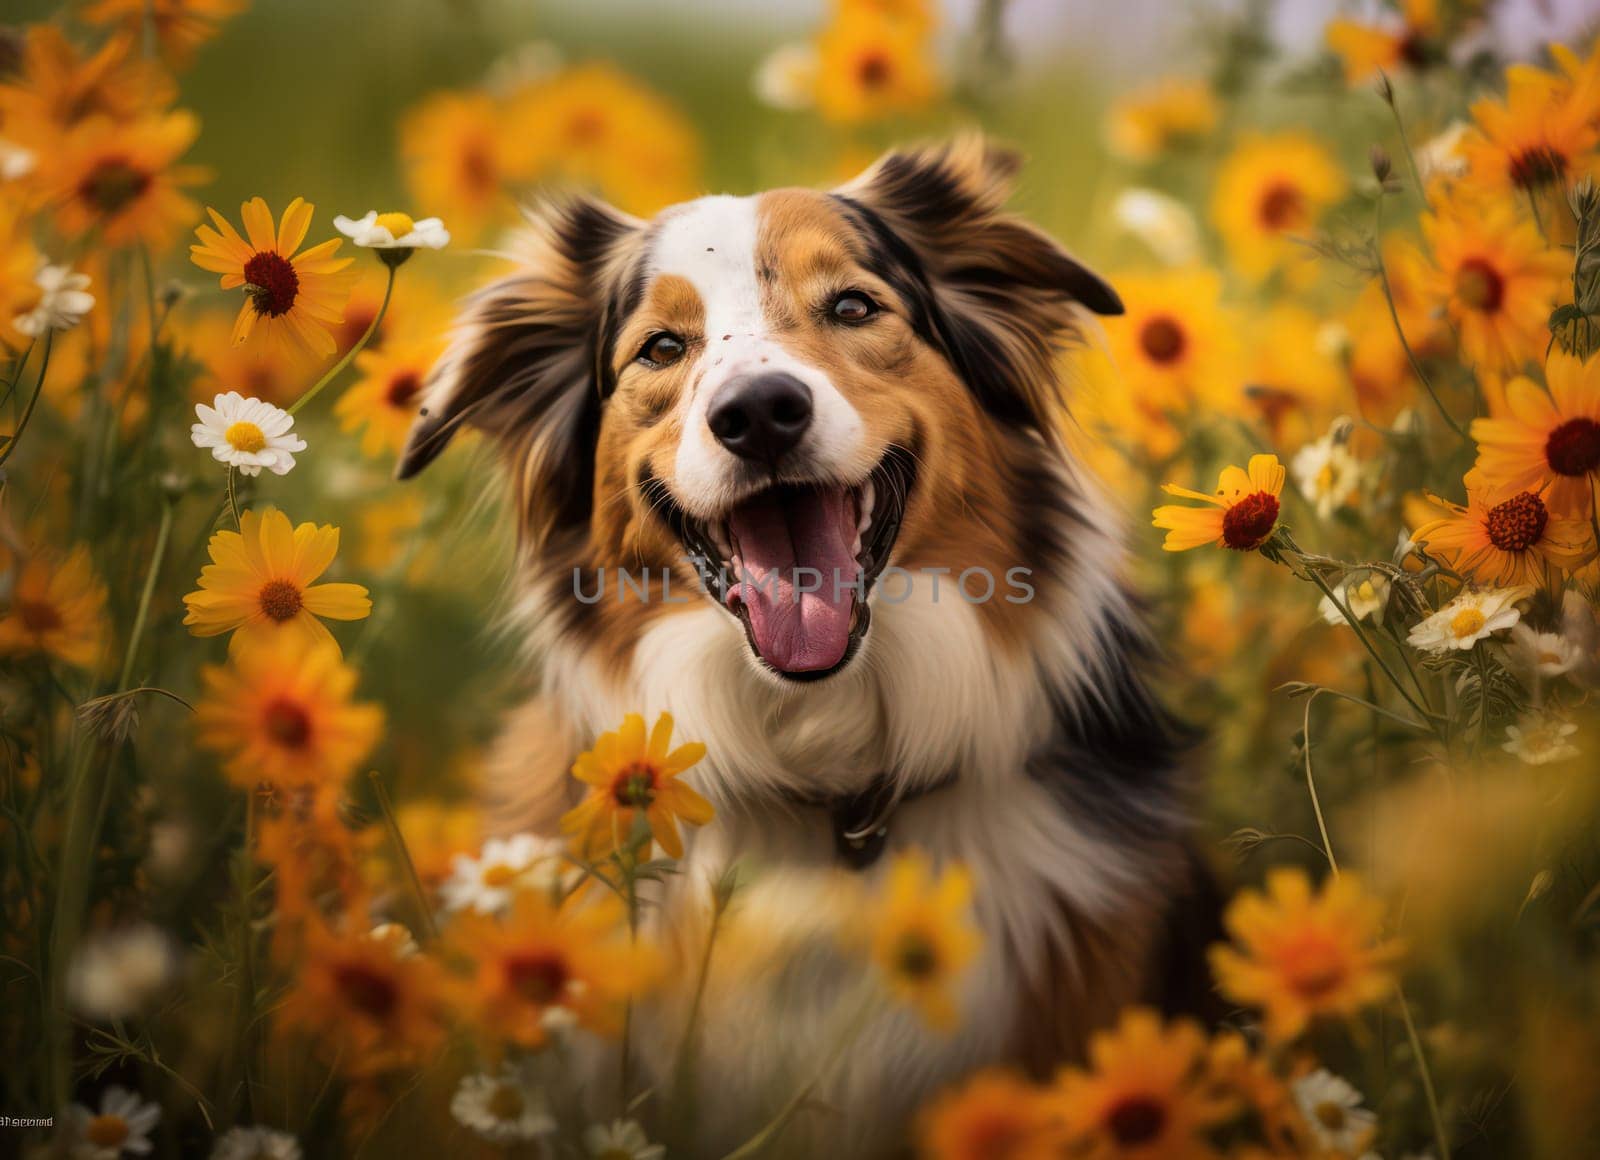 Happy Canine Companion Enjoying a Playful Summer Day in the Green Meadow with Colorful Flowers by Vichizh